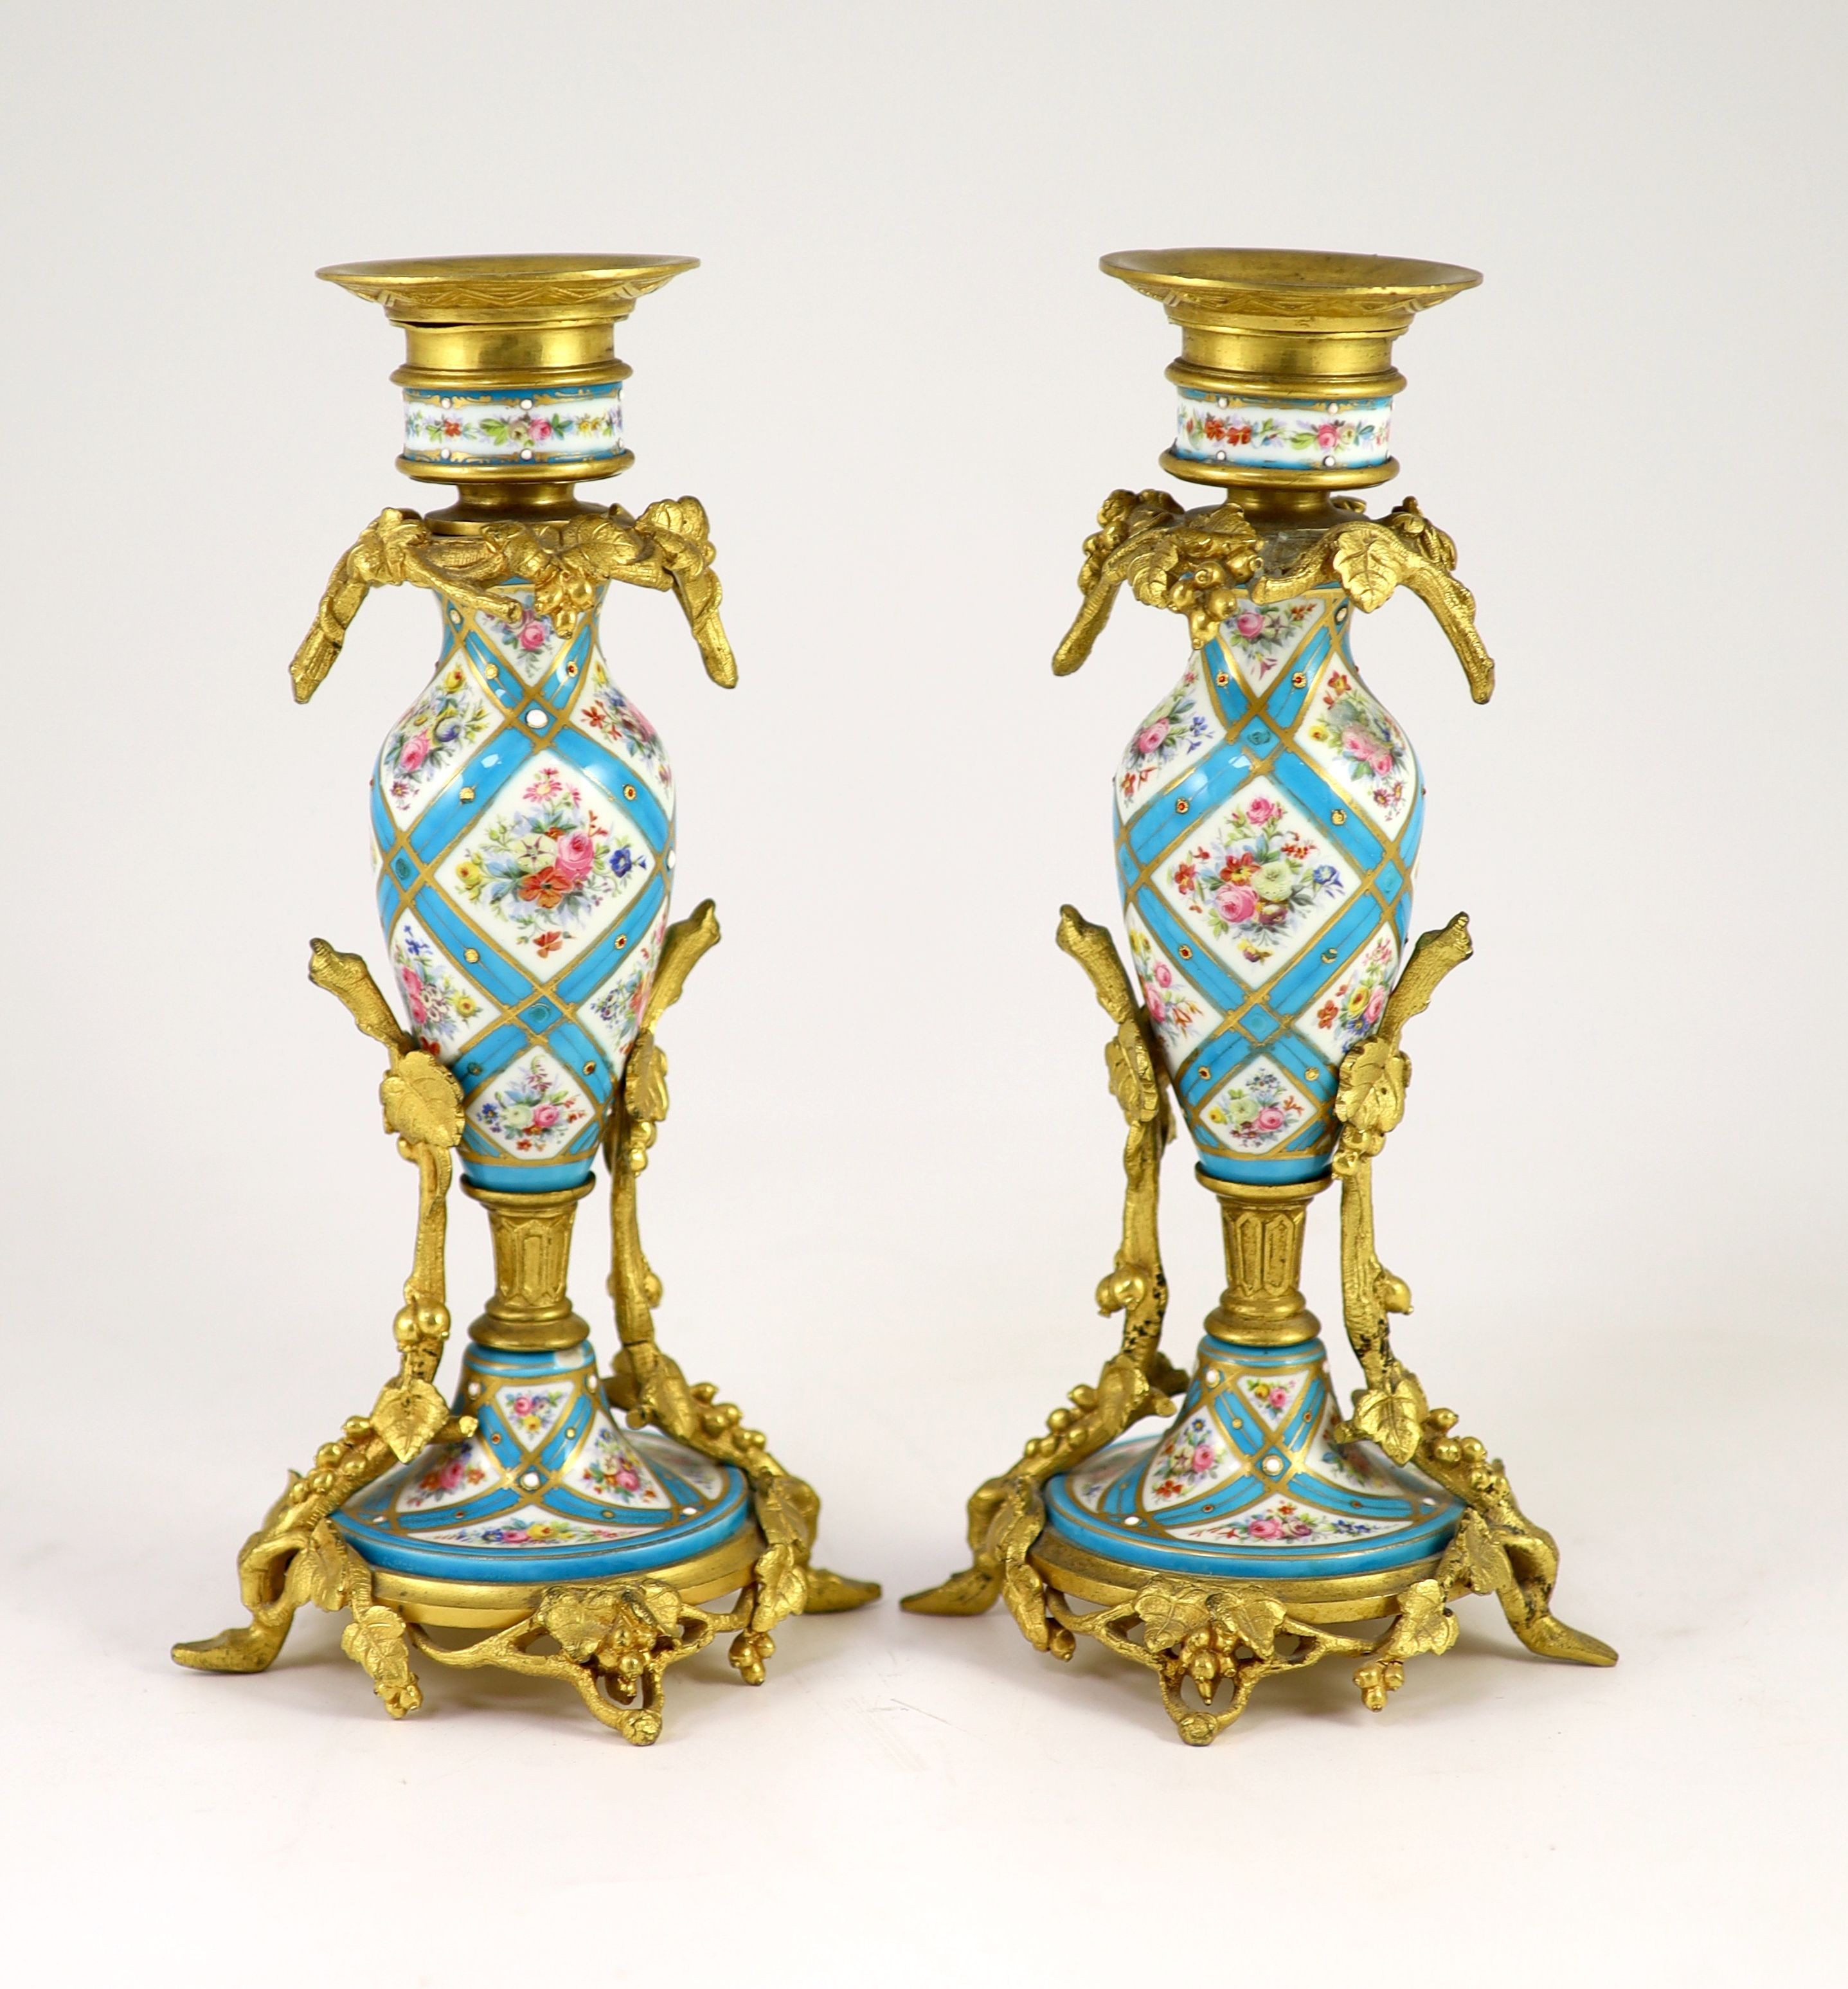 A pair of 19th century ormolu mounted Sevres style jewelled porcelain candlesticks, height 23cm